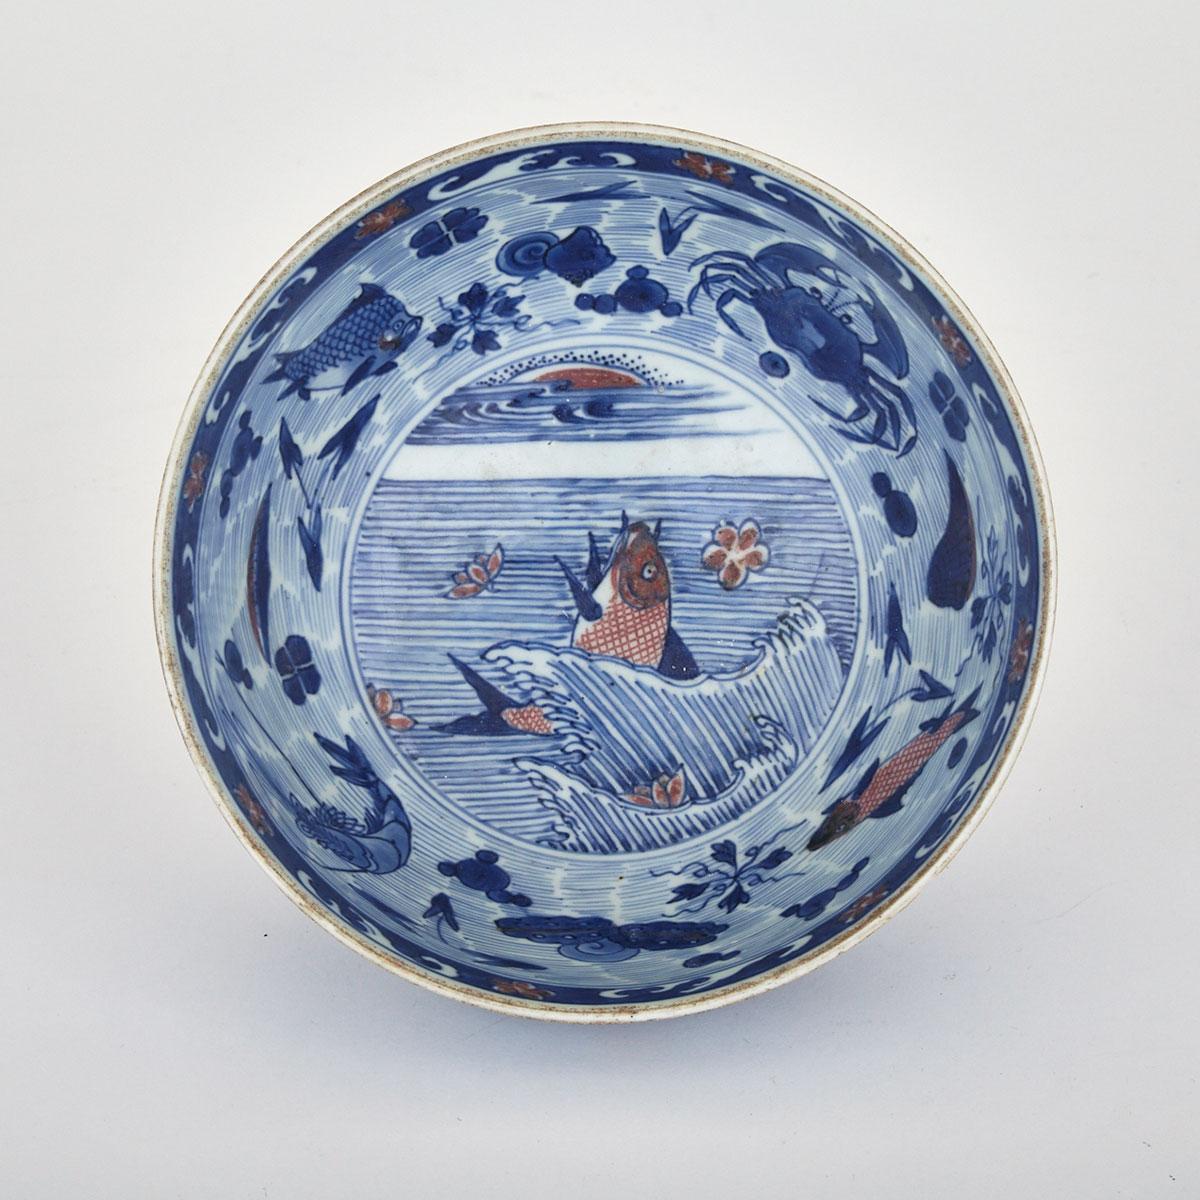 Blue, White and Copper Red ‘Sea Creatures’ Bowl, Kangxi Mark, Republican Period